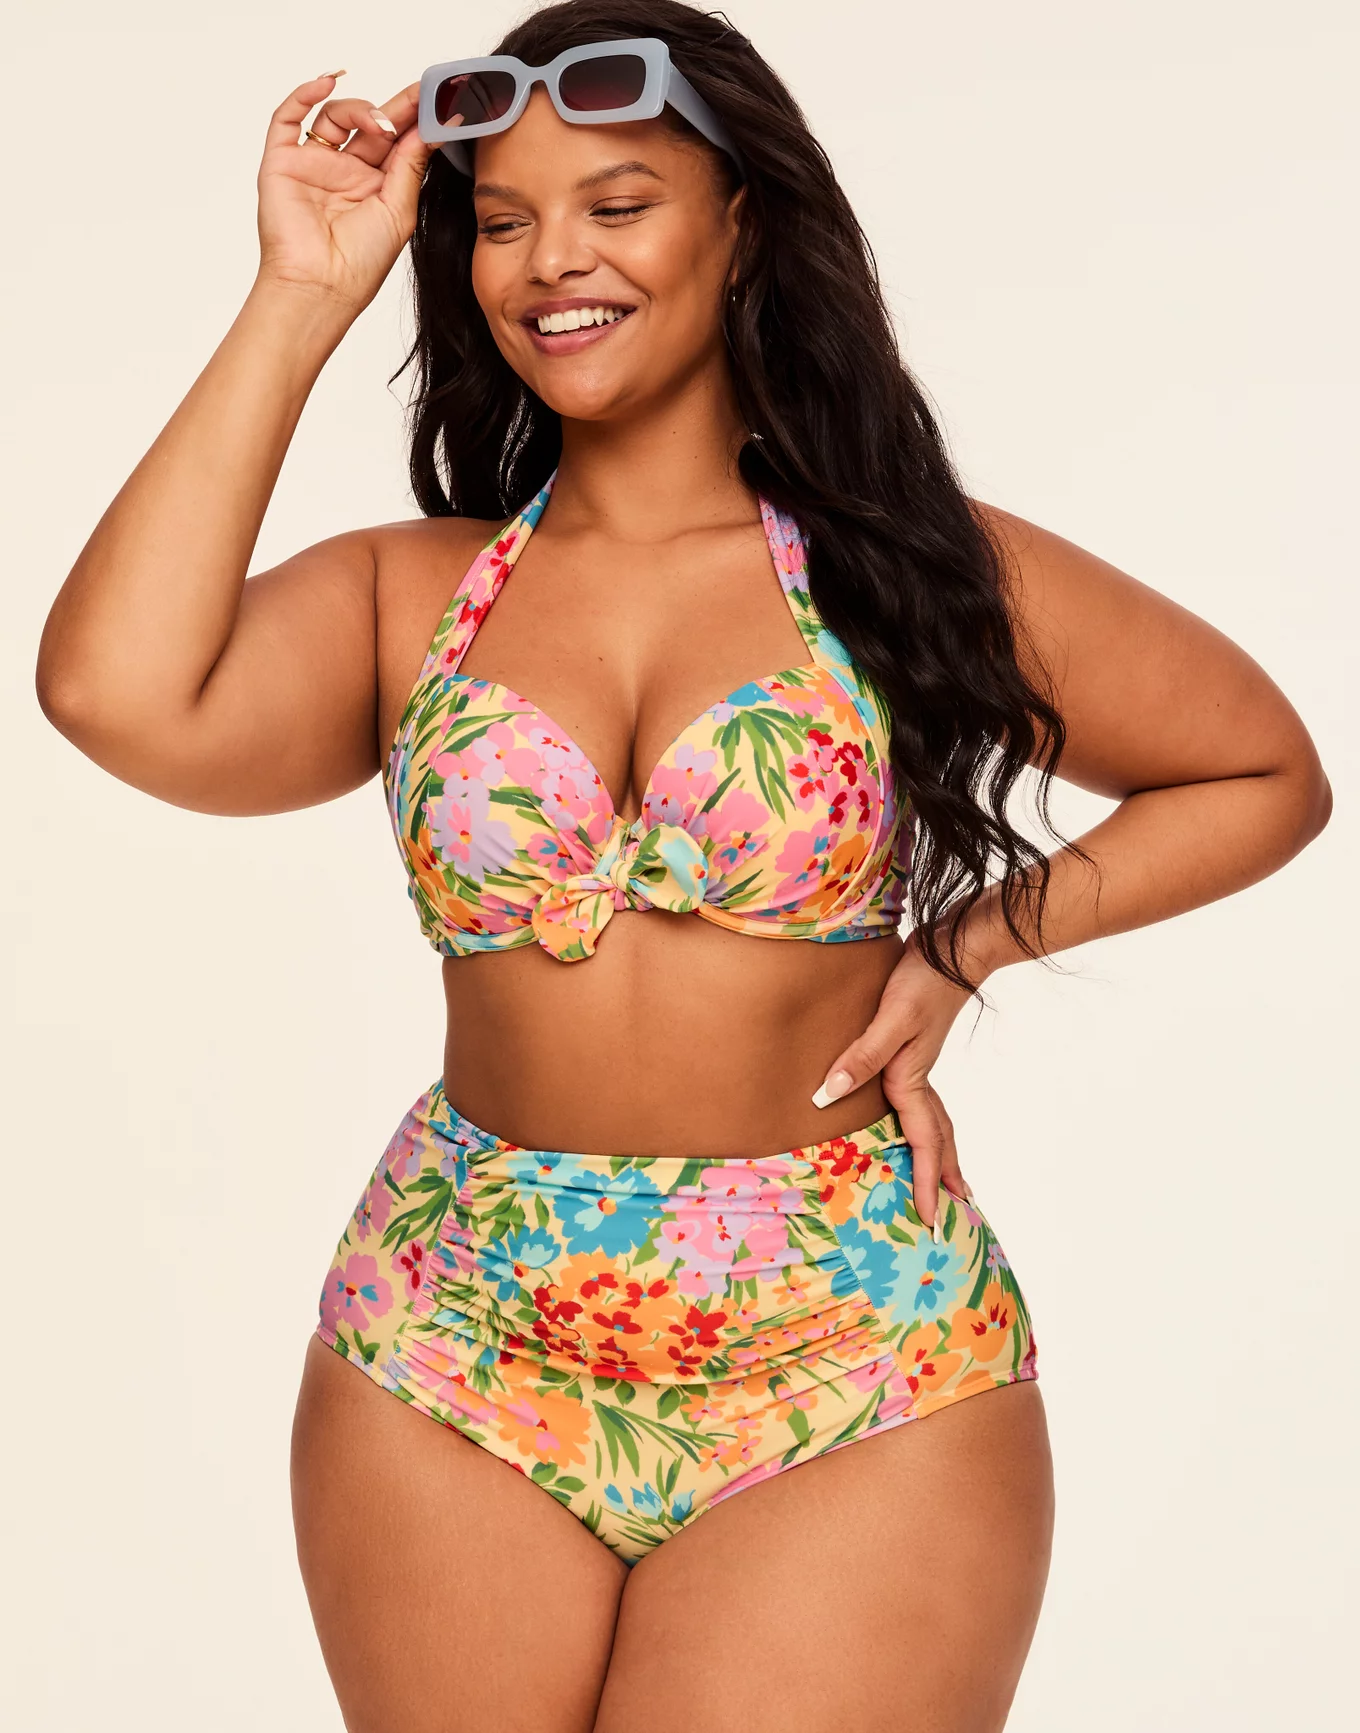 Flattering Swimsuits: We Need Swimwear One and Two Pieces